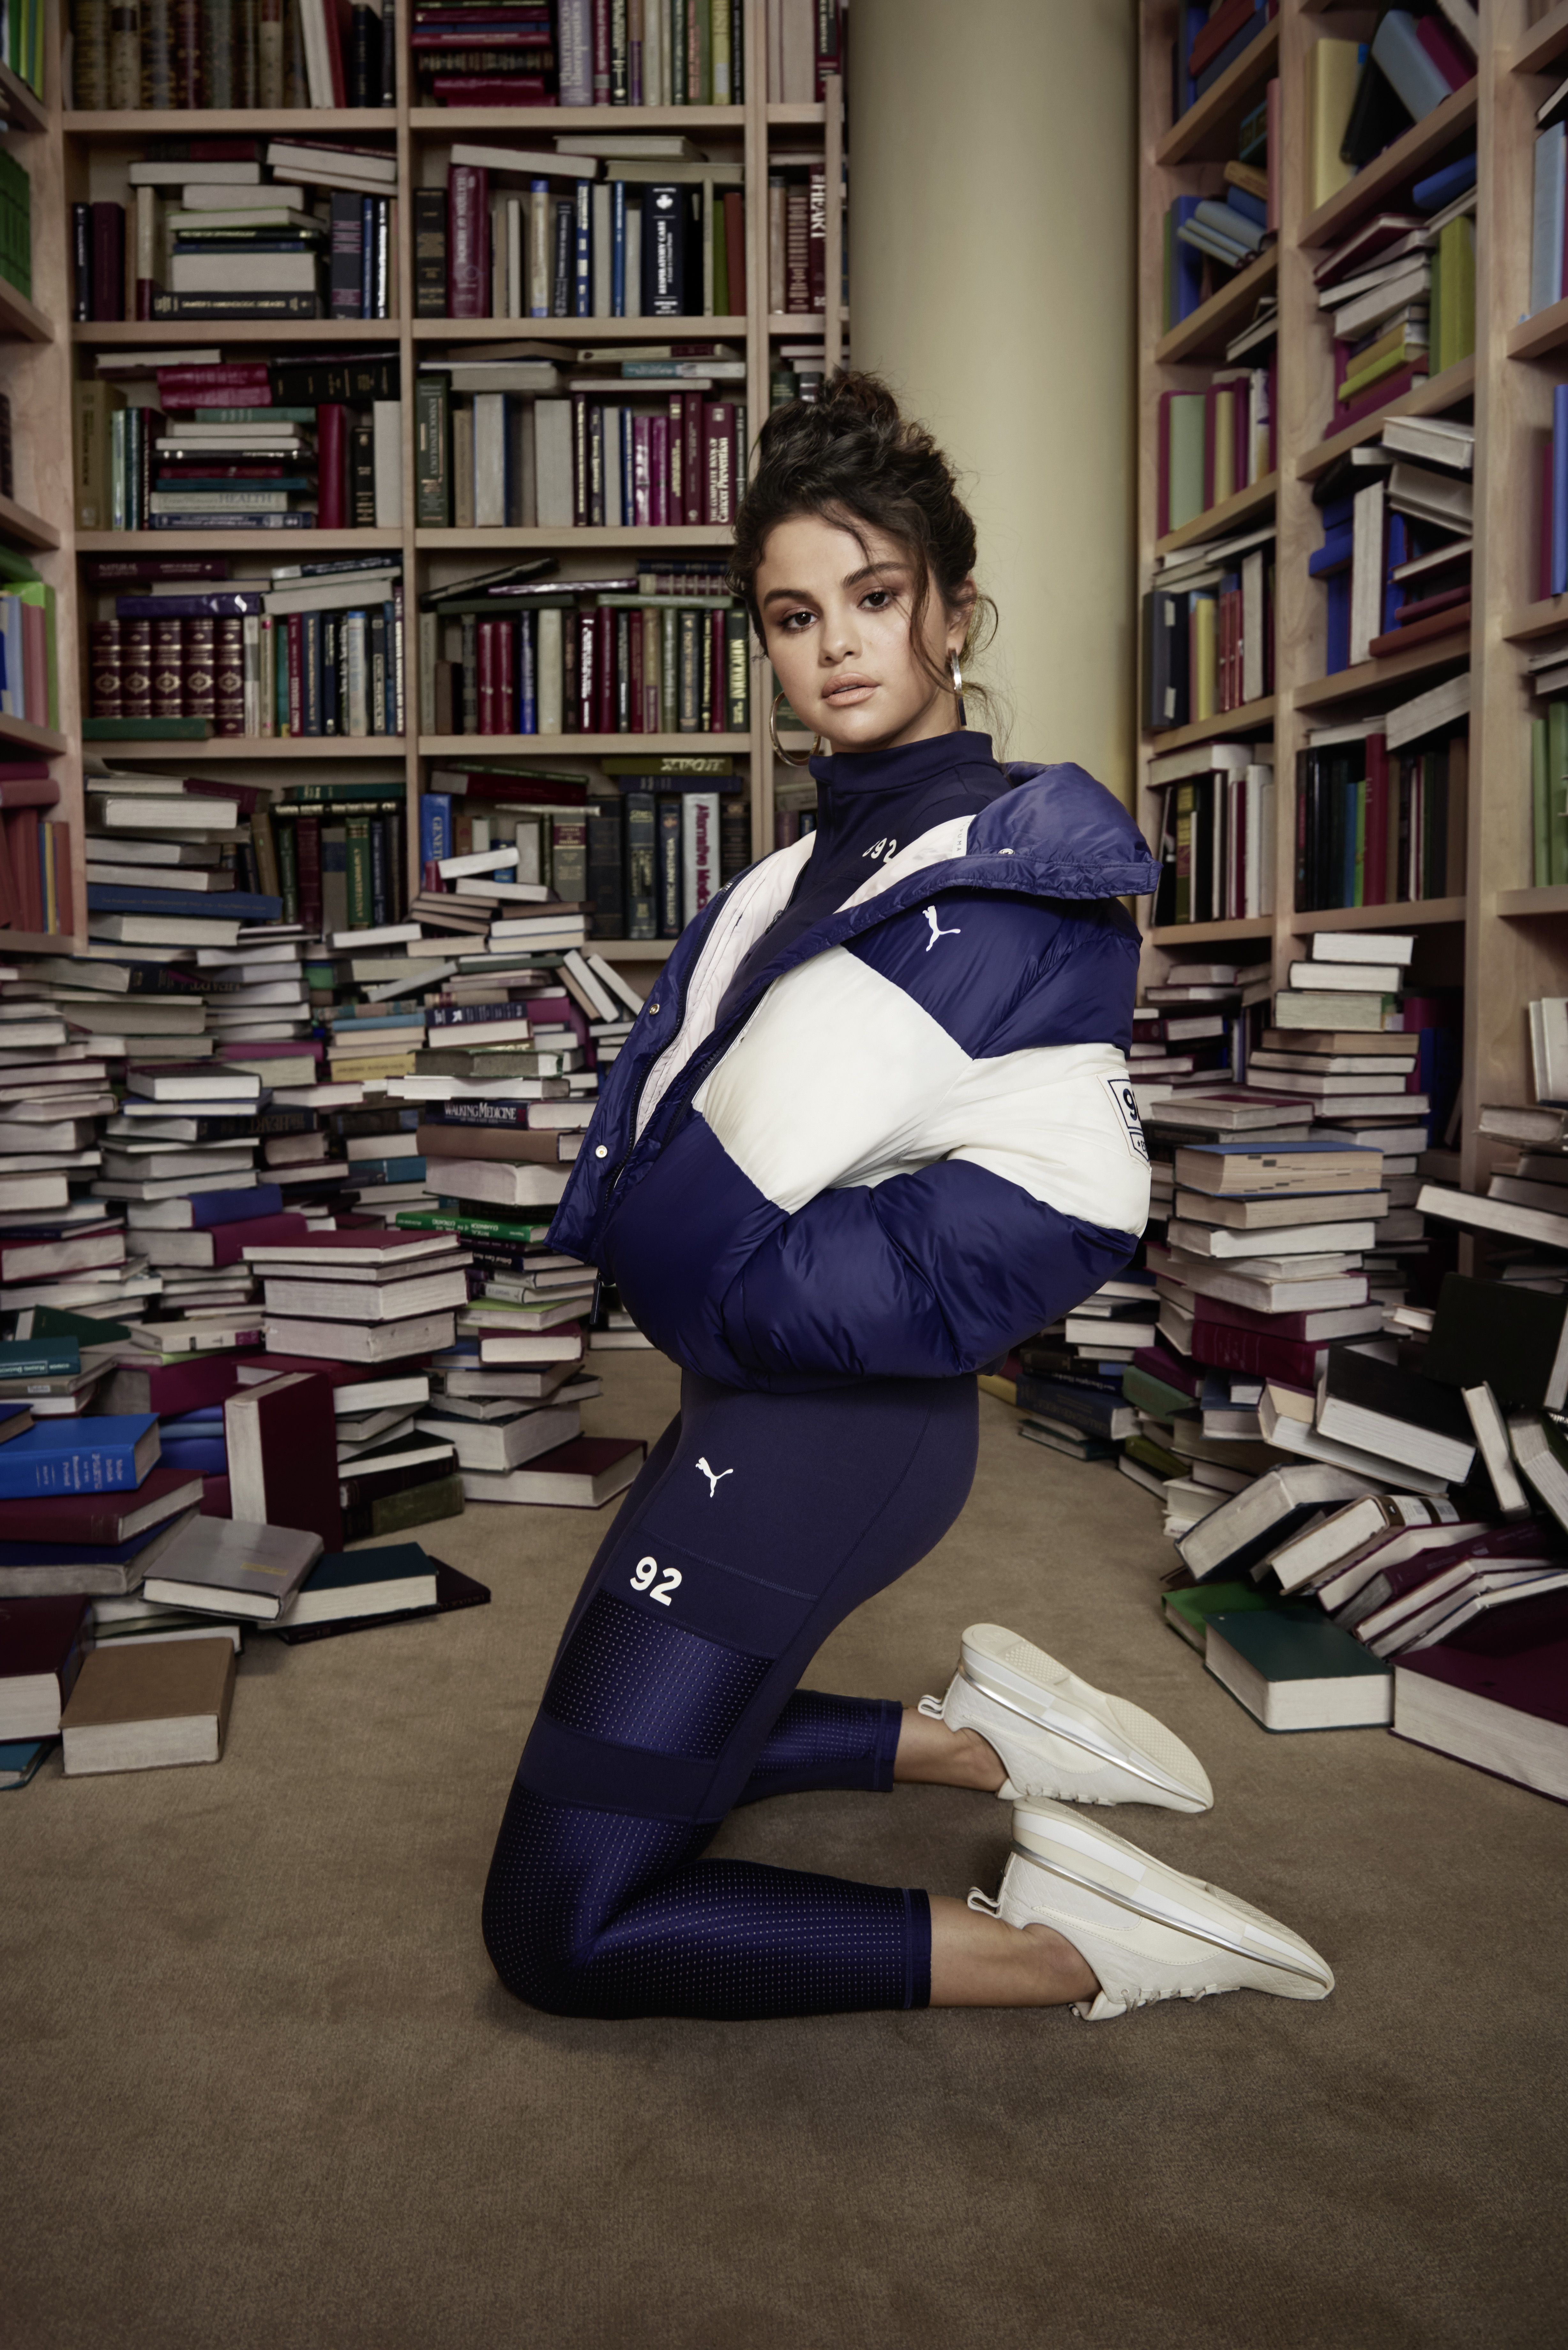 Bluebell hinanden Mekanisk Selena Gomez Hid Meaningful Symbols in Her New Puma Clothing Line